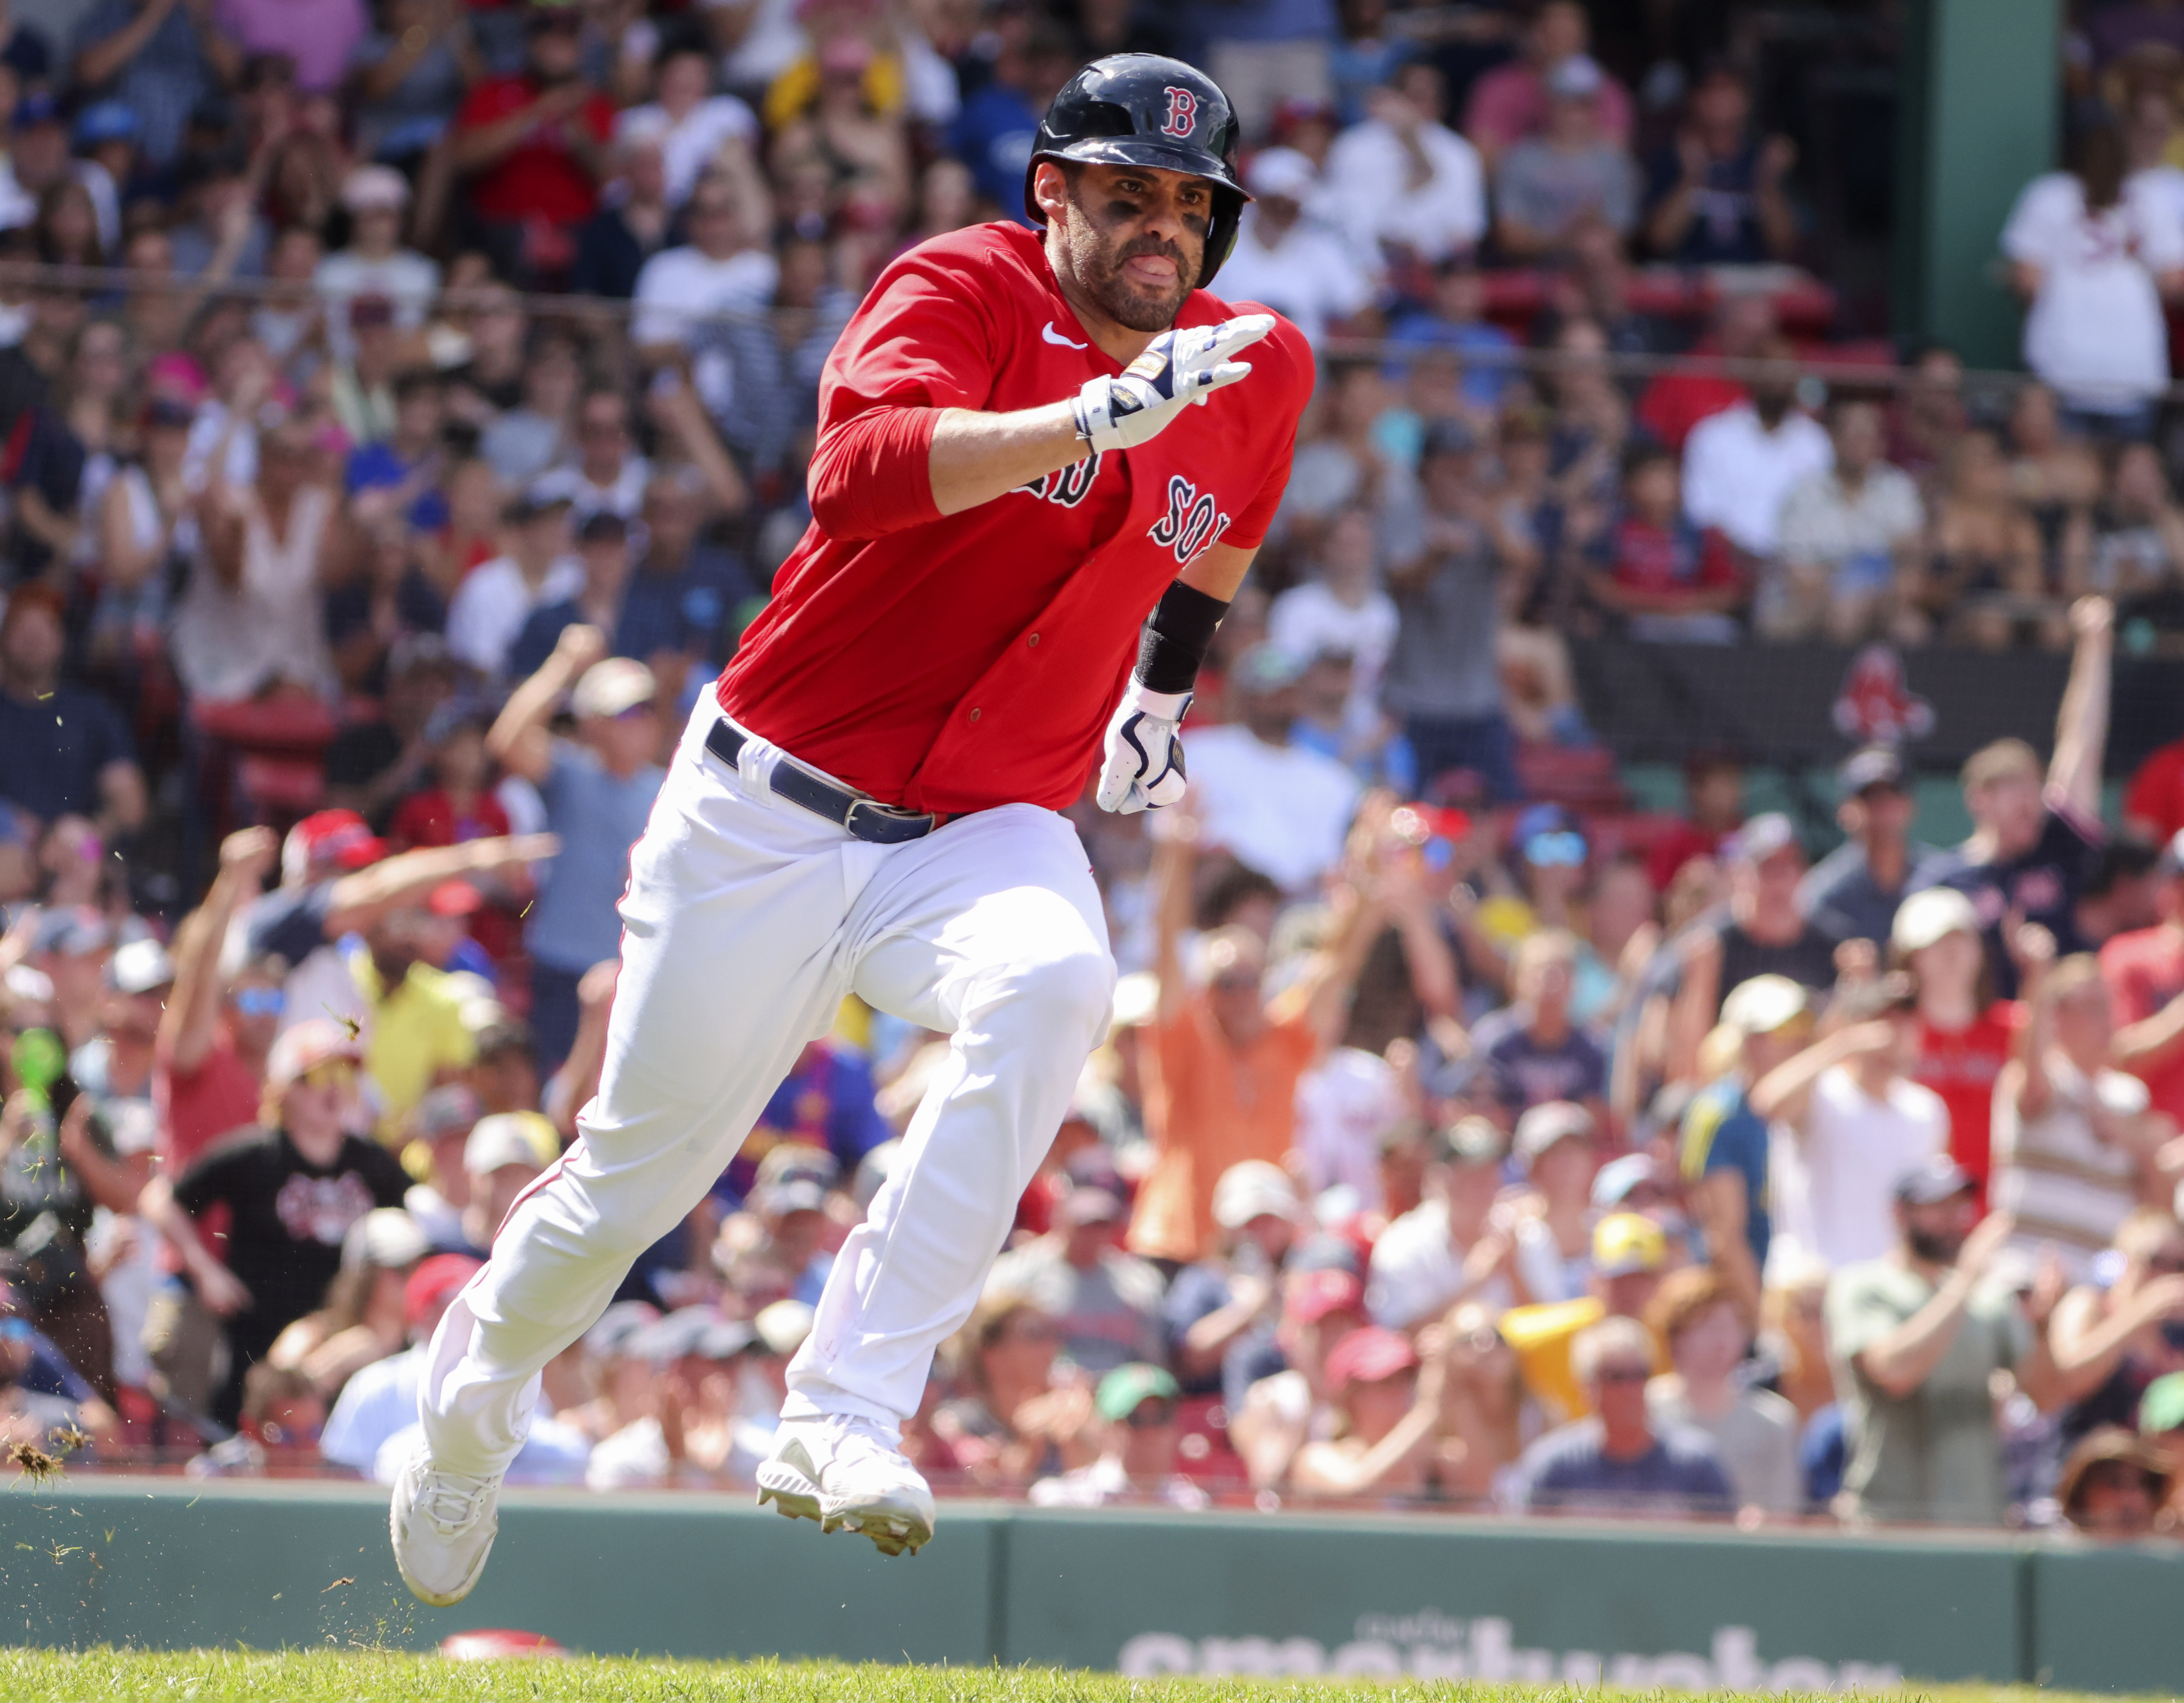 With roster changes looming, Red Sox overcome distractions and right ship  for a day with win vs. Brewers - The Boston Globe